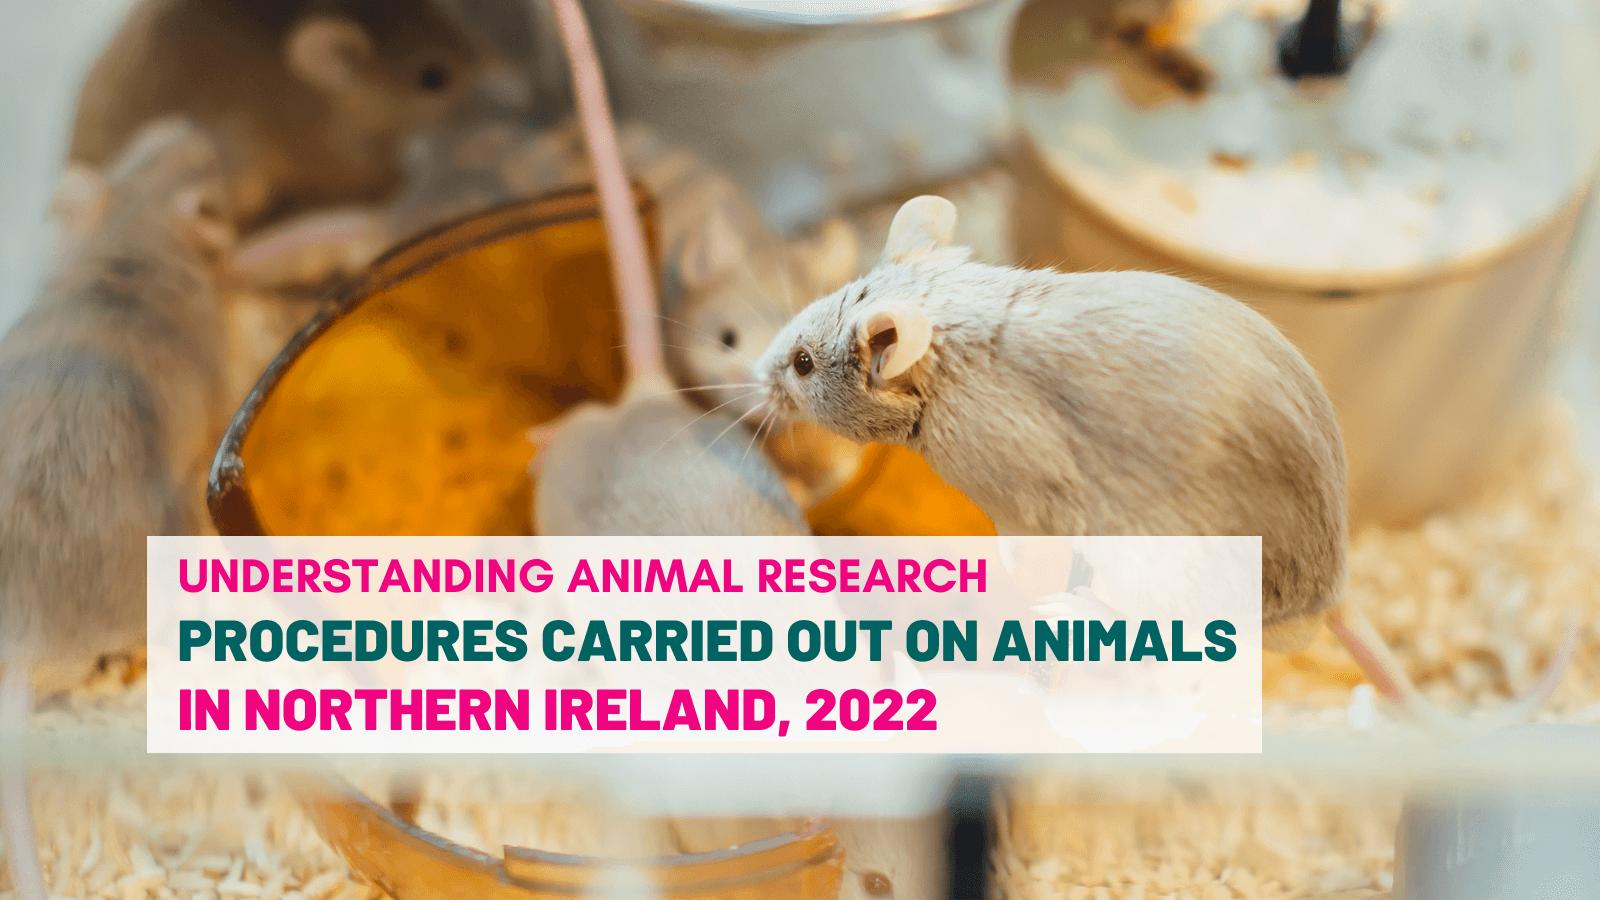 Procedures carried out on animals in Northern Ireland, 2022